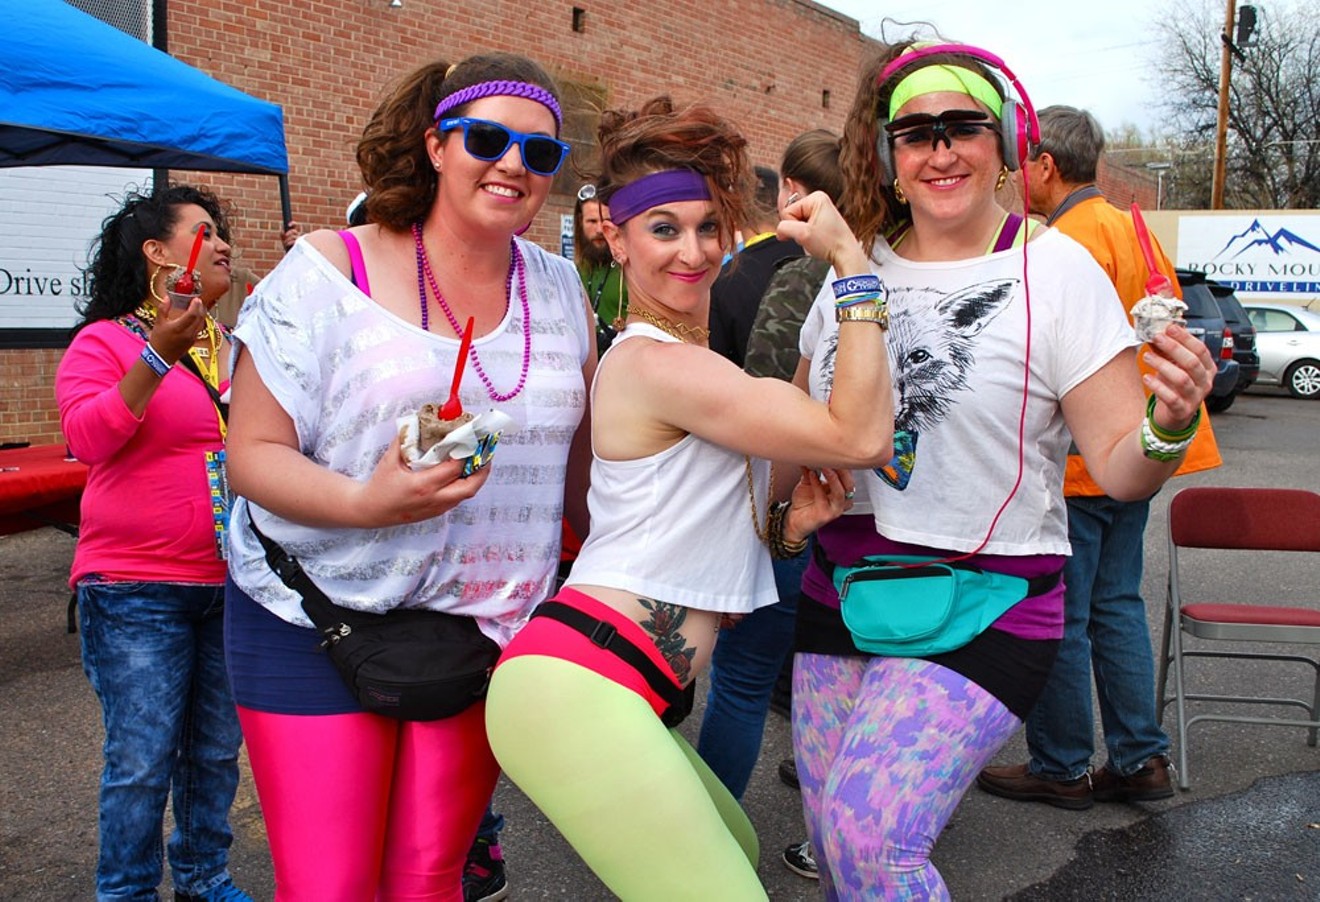 Bring back the ’80s and celebrate one of Denver's favorite thoroughfares at Totally Tennyson.